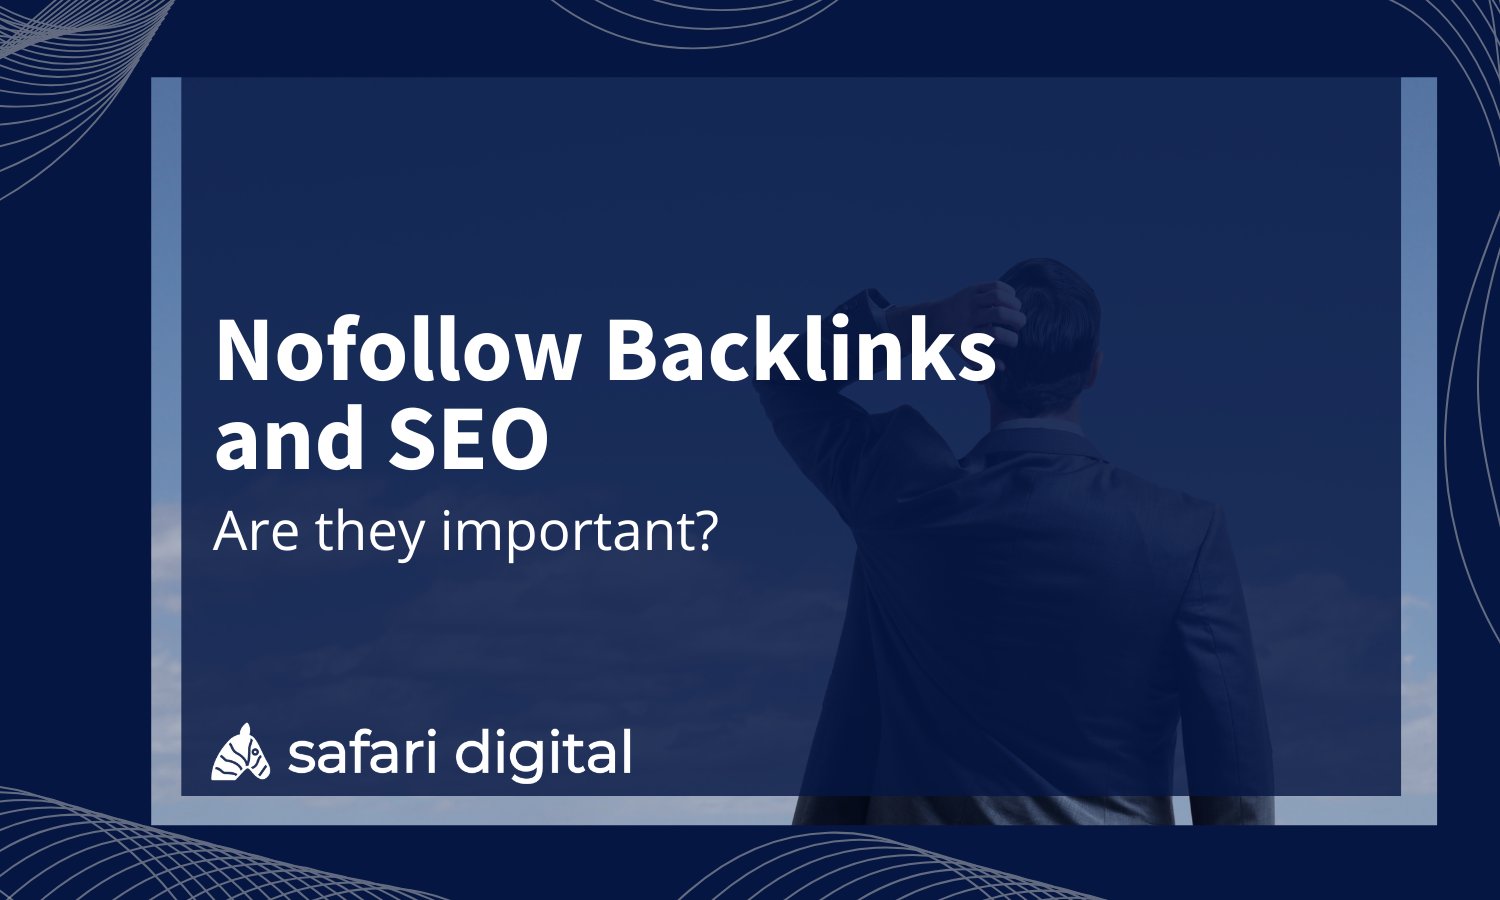 Nofollow Backlinks and SEO - are they still important?